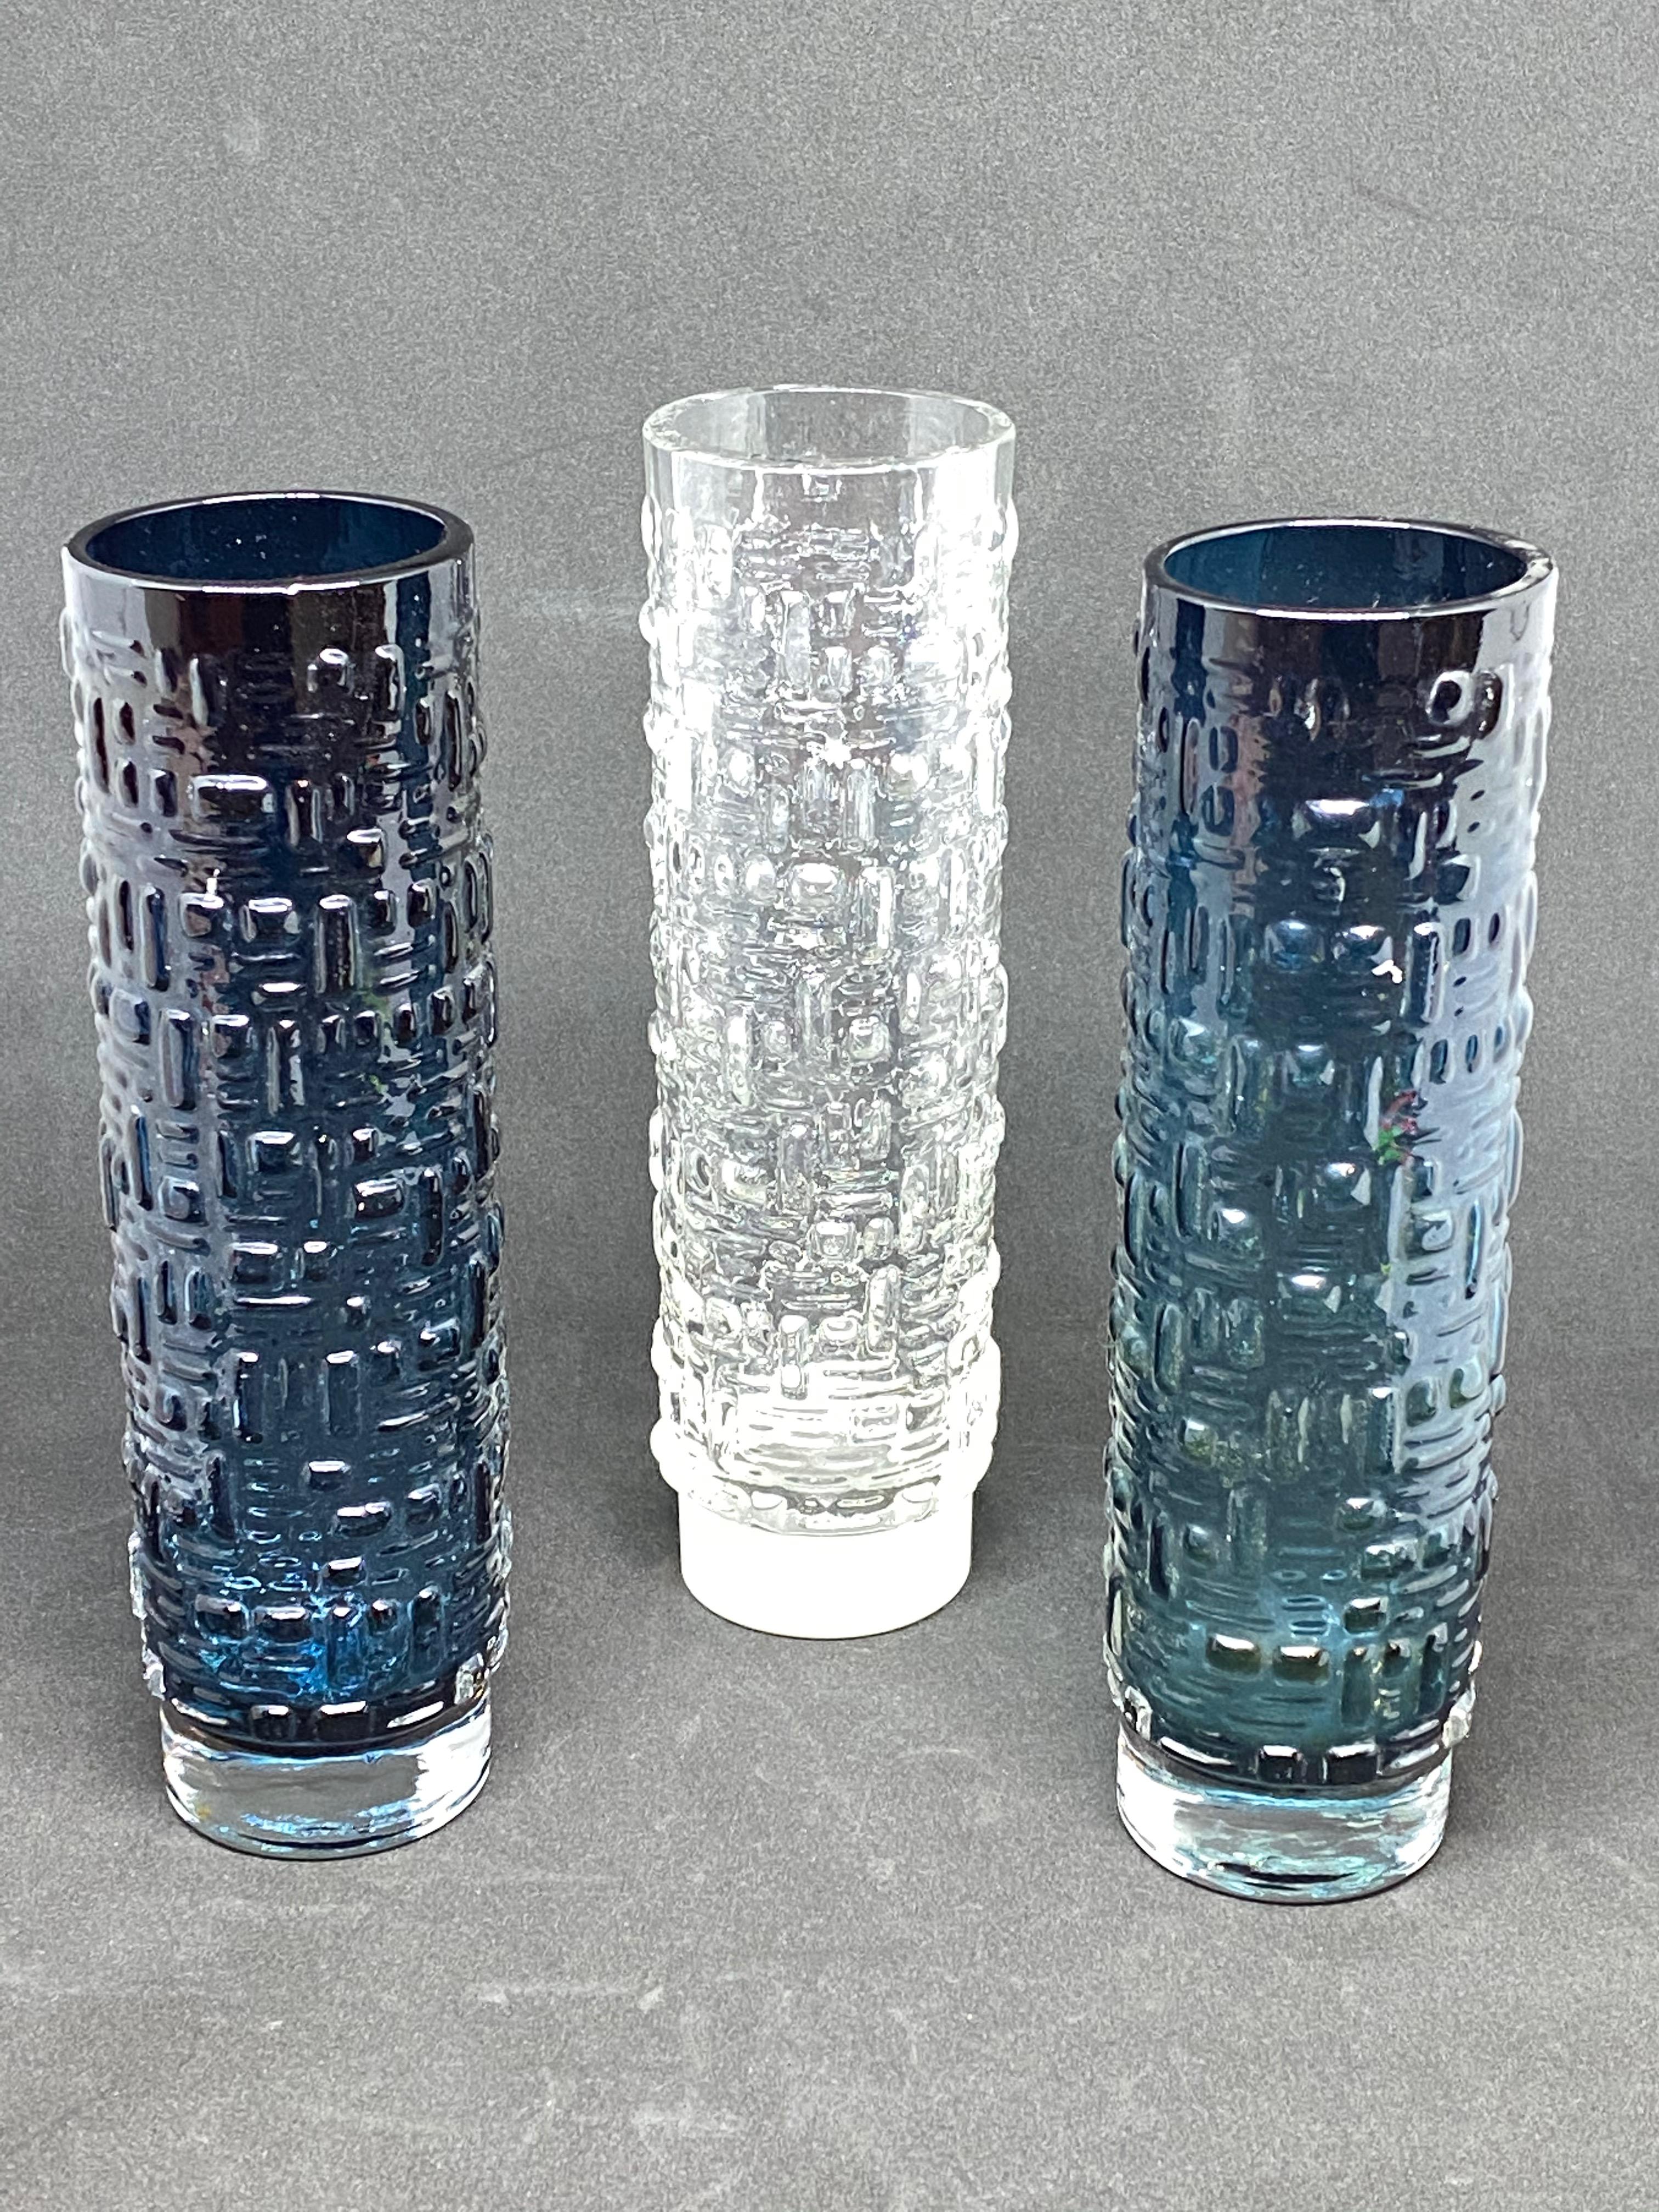 Wonderful Mid-Century Modern German vases by Gral Glass, designed by Emil Funke, circa 1970. These beautiful petrol colored and clear vases bring a touch of fun and fantasy to any room. A nice addition to any room. Each one is approximate 8 1/4